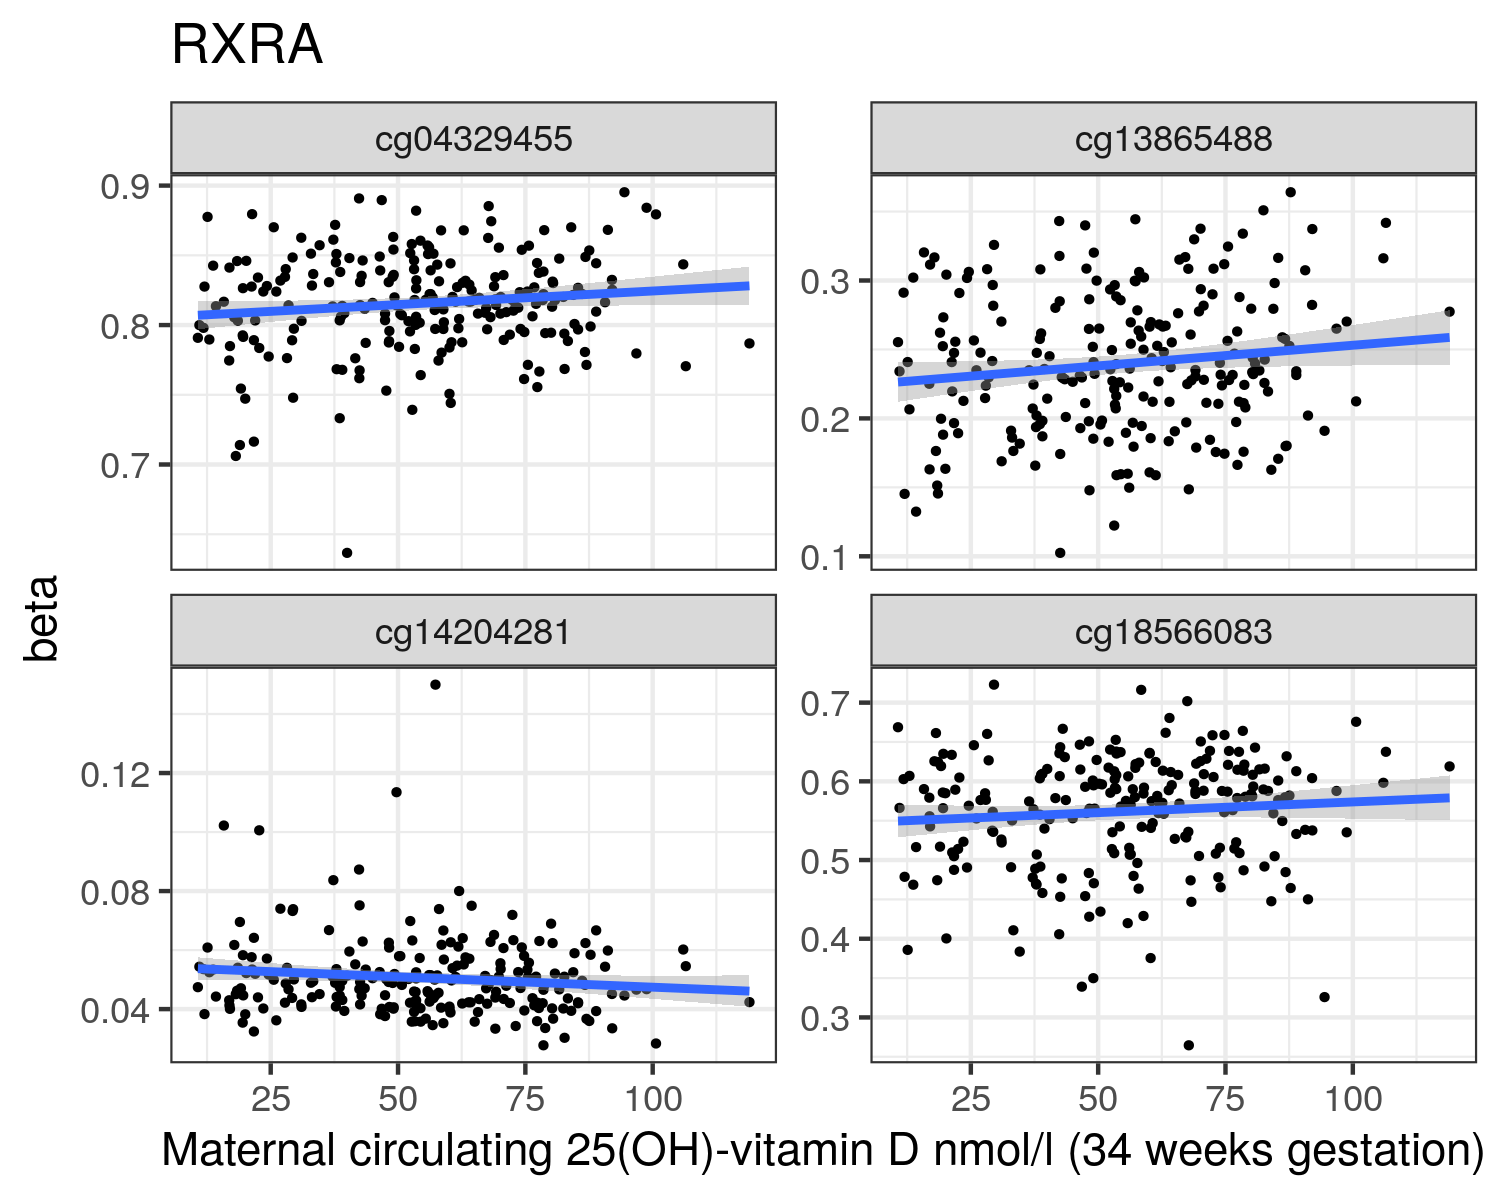 RXRA gene associated probes showing nominally significant (p<0.05) changes in DNA methylation with maternal vitamin D at 34 weeks gestation